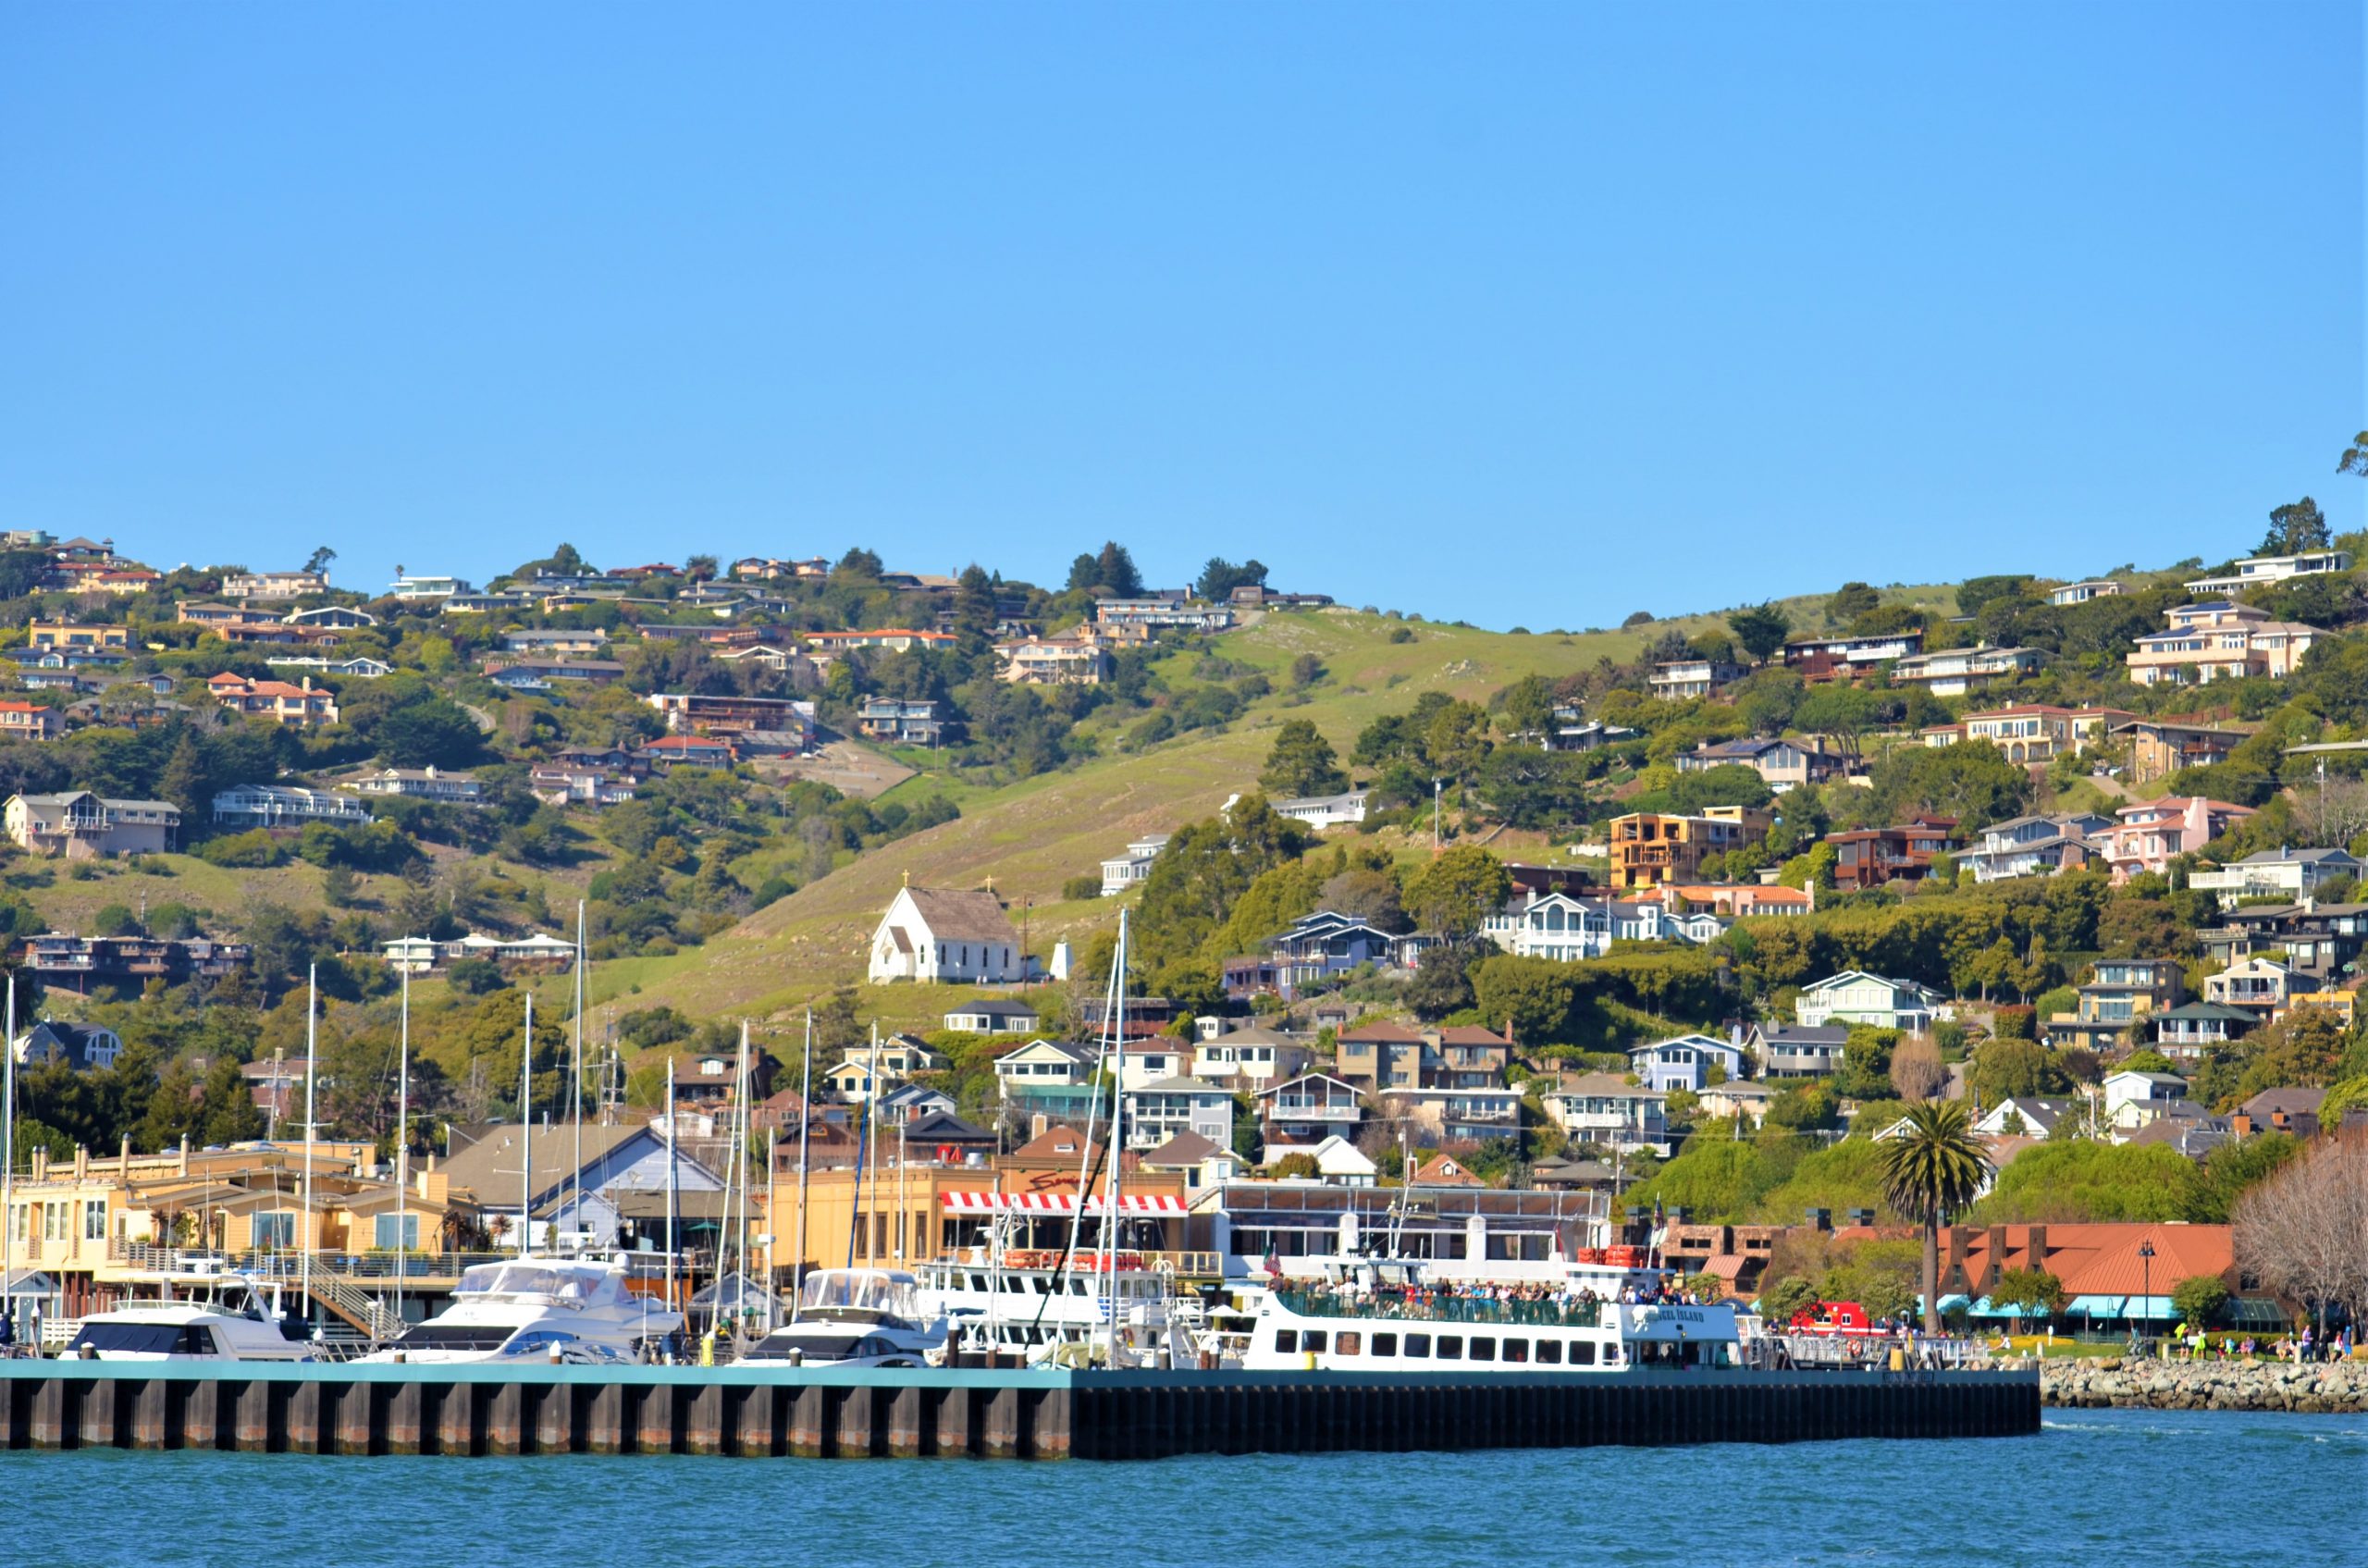 The town of Tiburon, CA is viewed from the waterfront. Many homes nestled into the hillside and many local waterfront businesses are pictured.